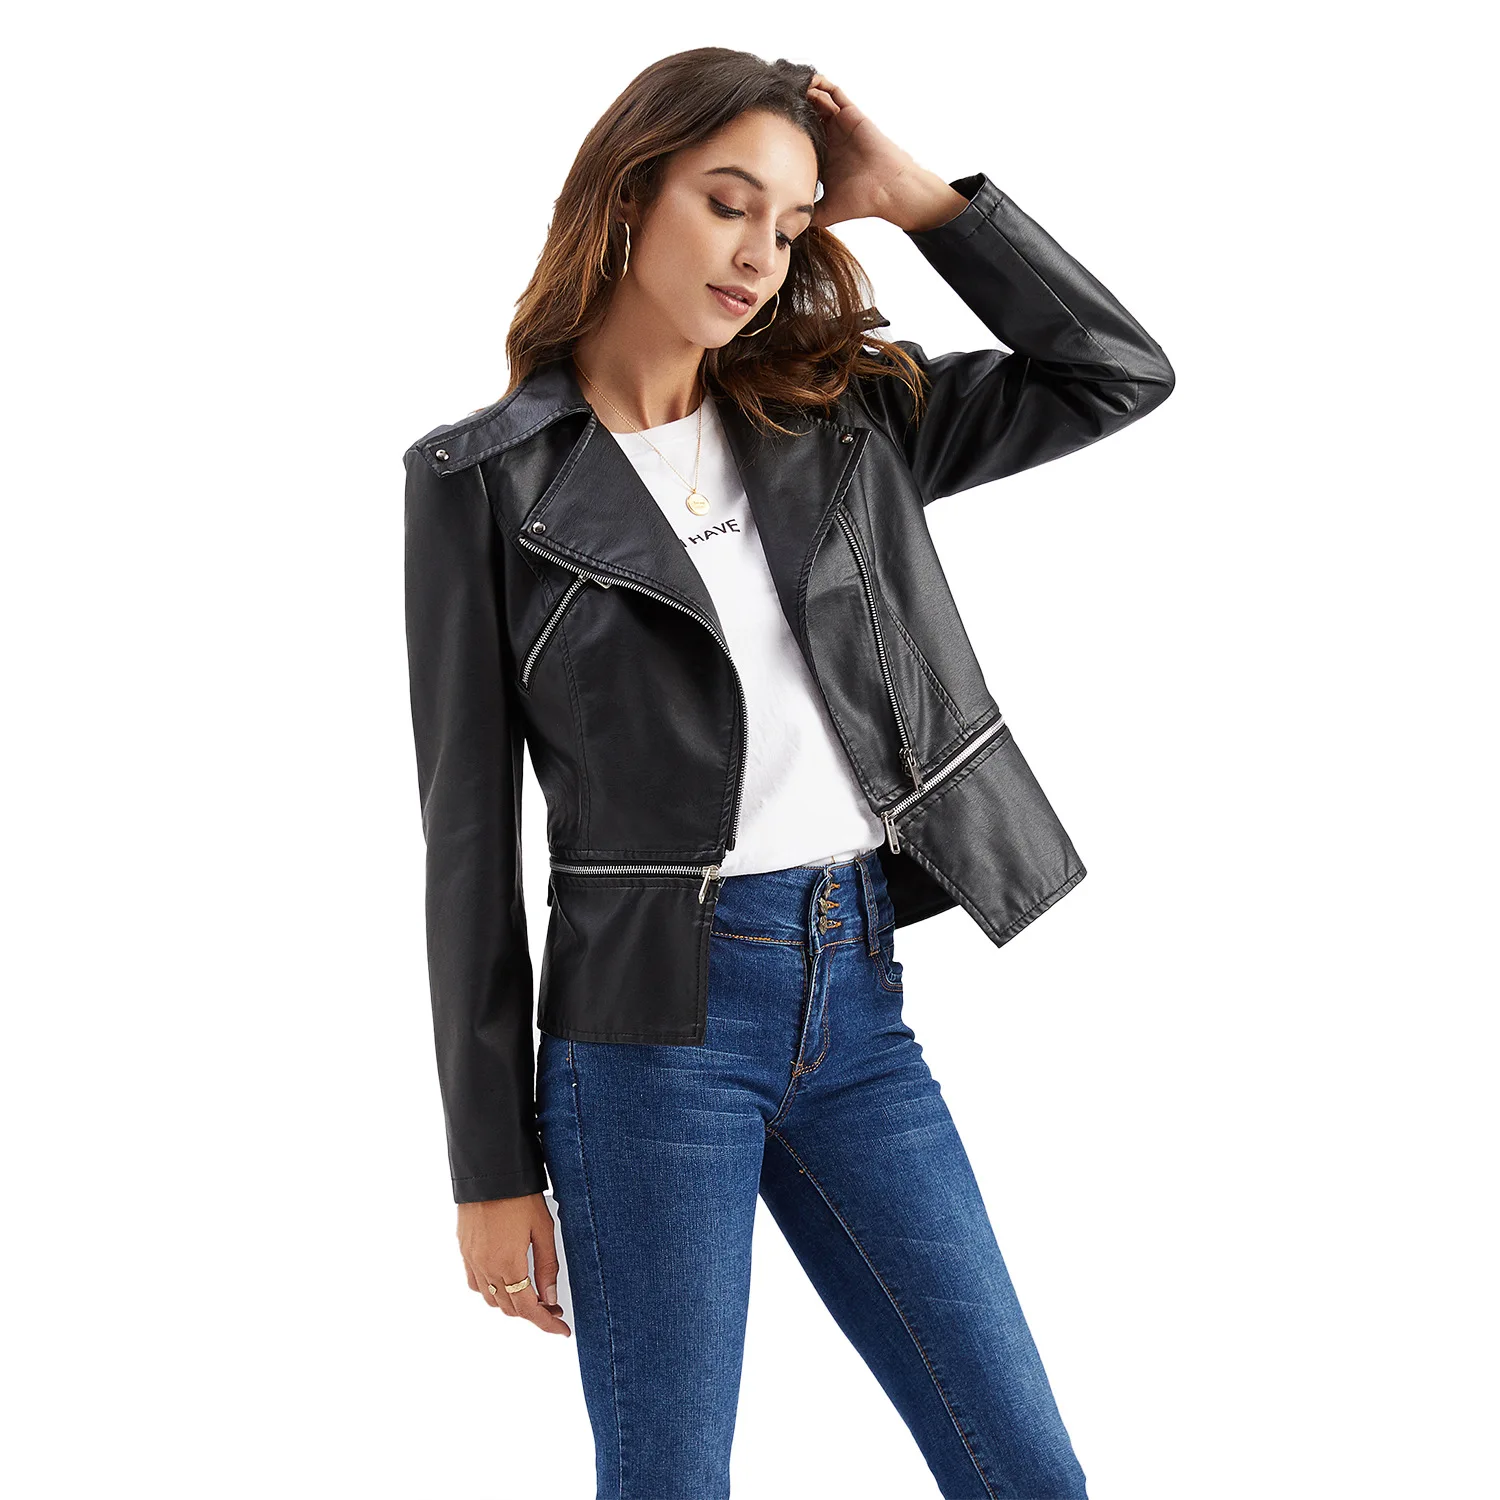 Women's Leisure Hem Detachable Leather Jacket, Spring and Autumn Coat, European and American Fashion, High-Quality Lapel Zipper, 2021 autumn and winter women s detachable hooded leather clothes plush warm european american fashion jacket pu coat